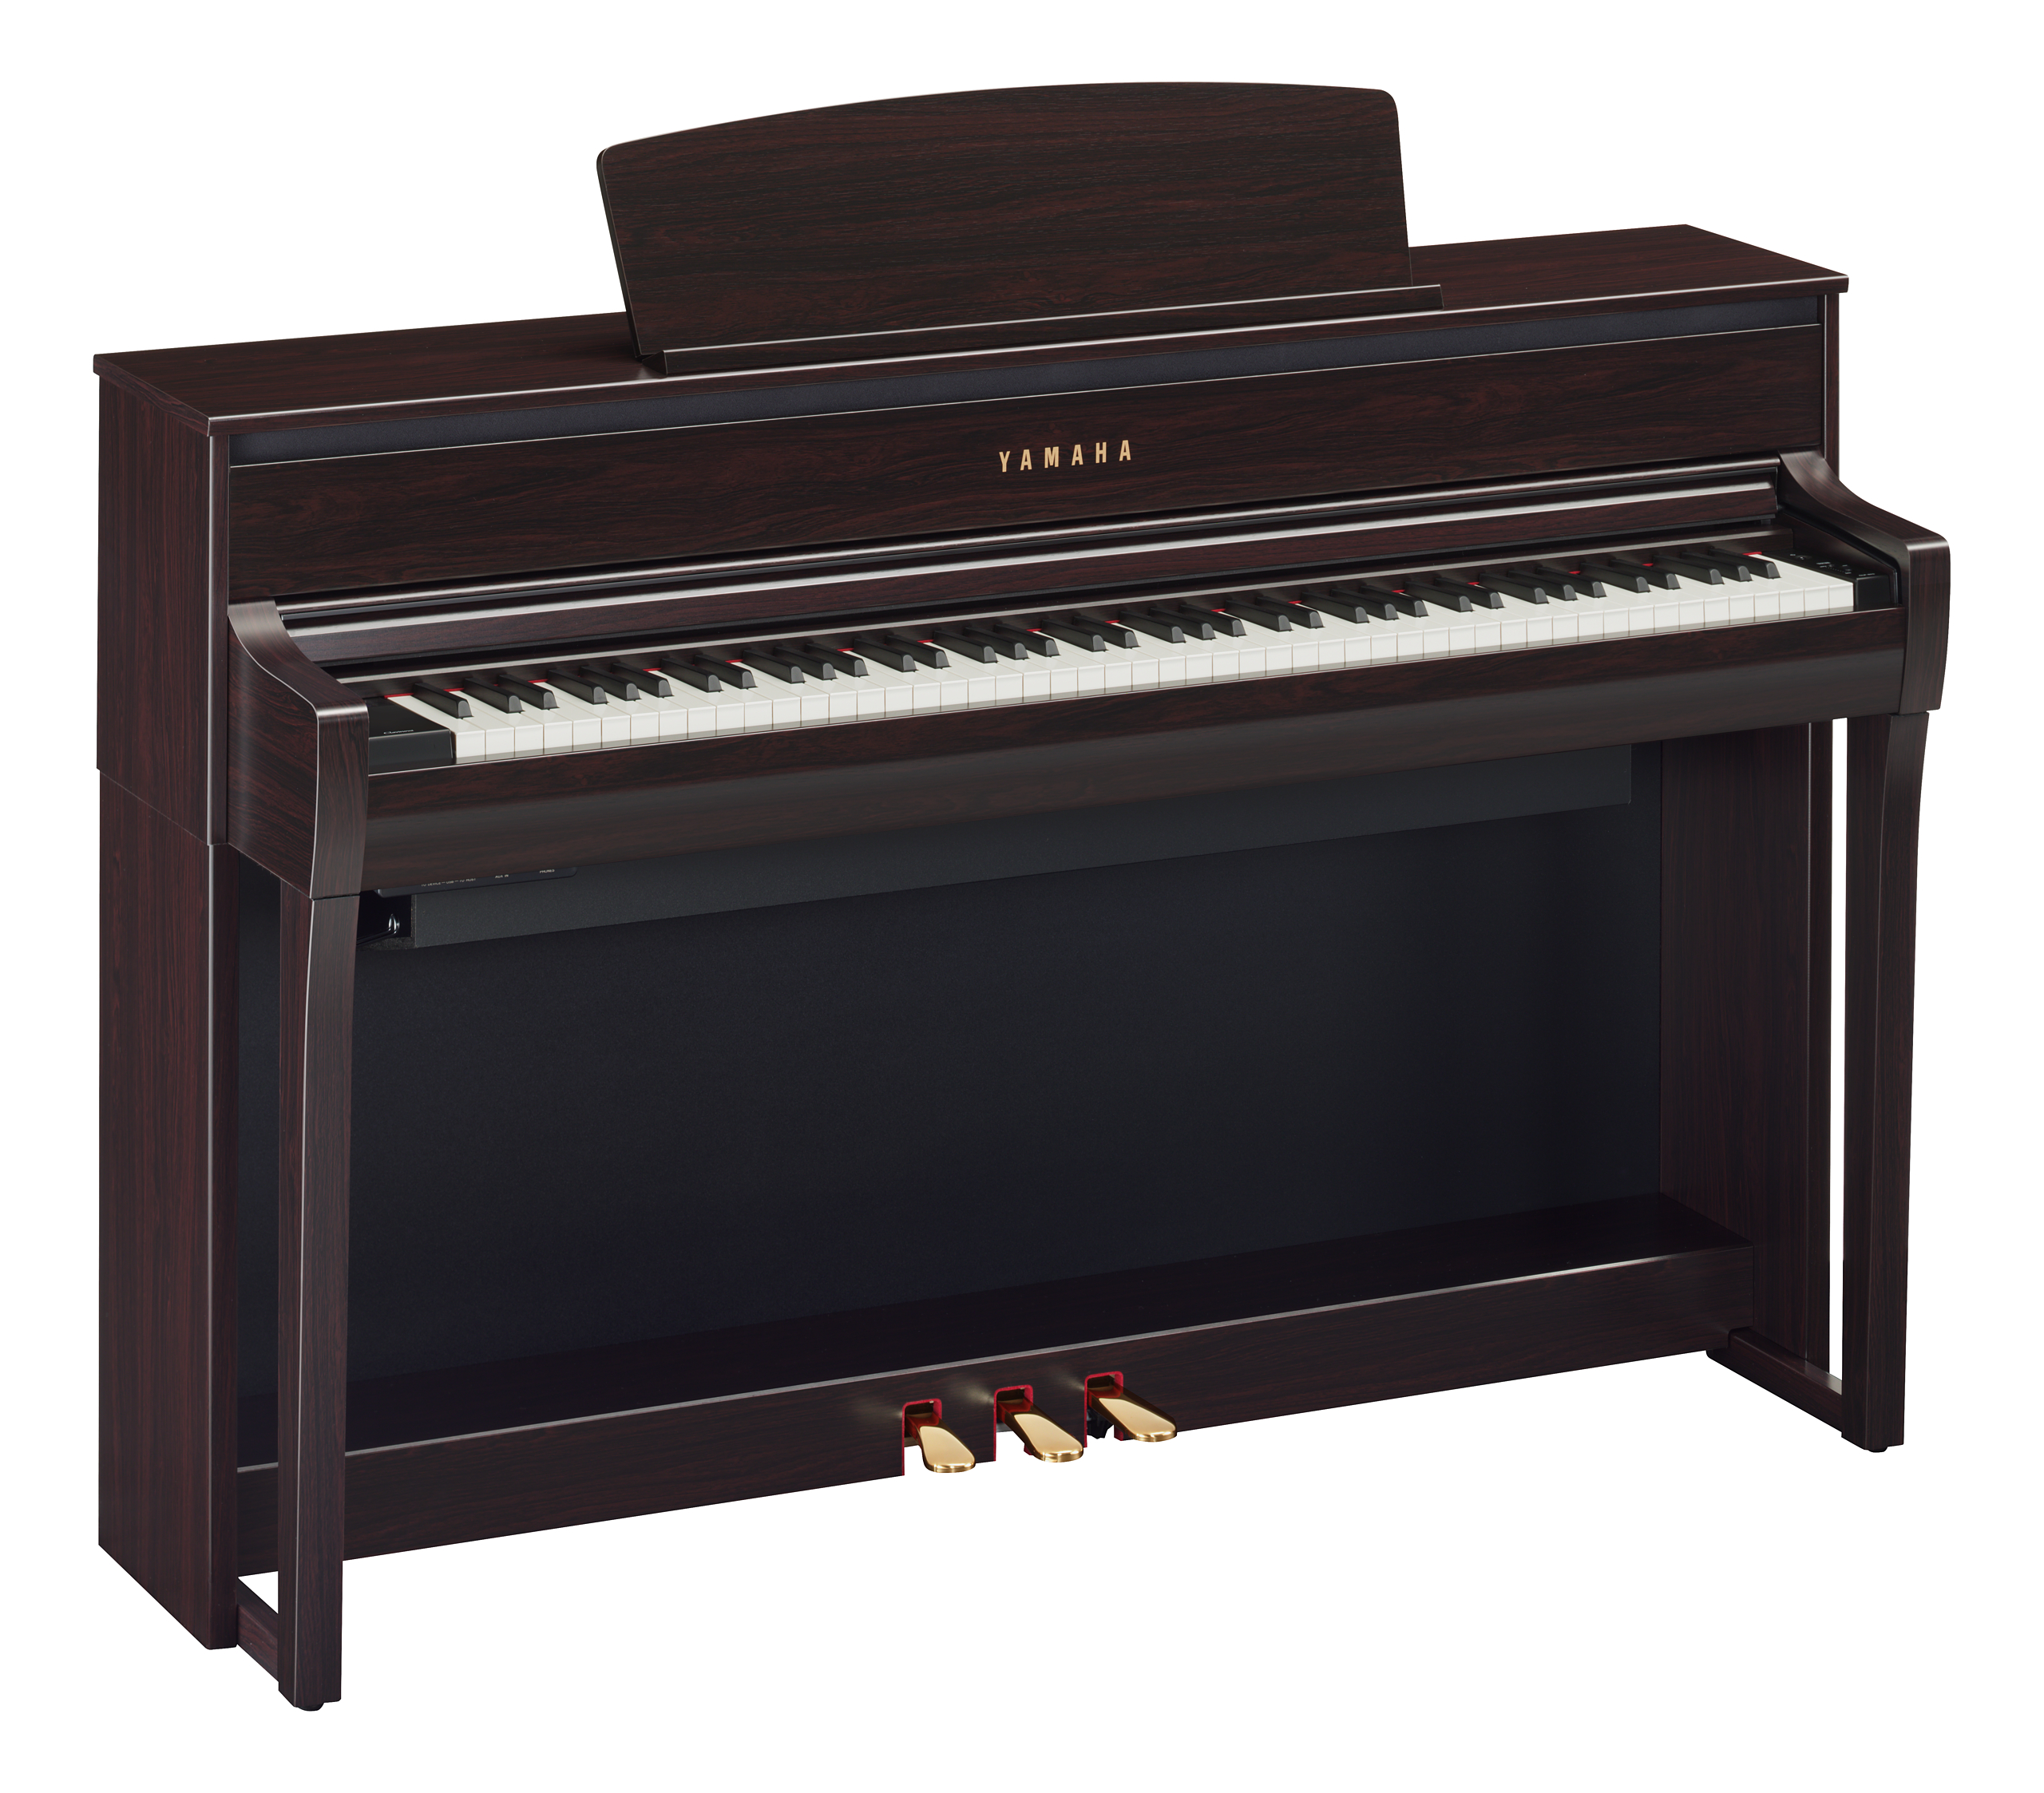 Yamaha Clp775r - Digital piano with stand - Variation 2